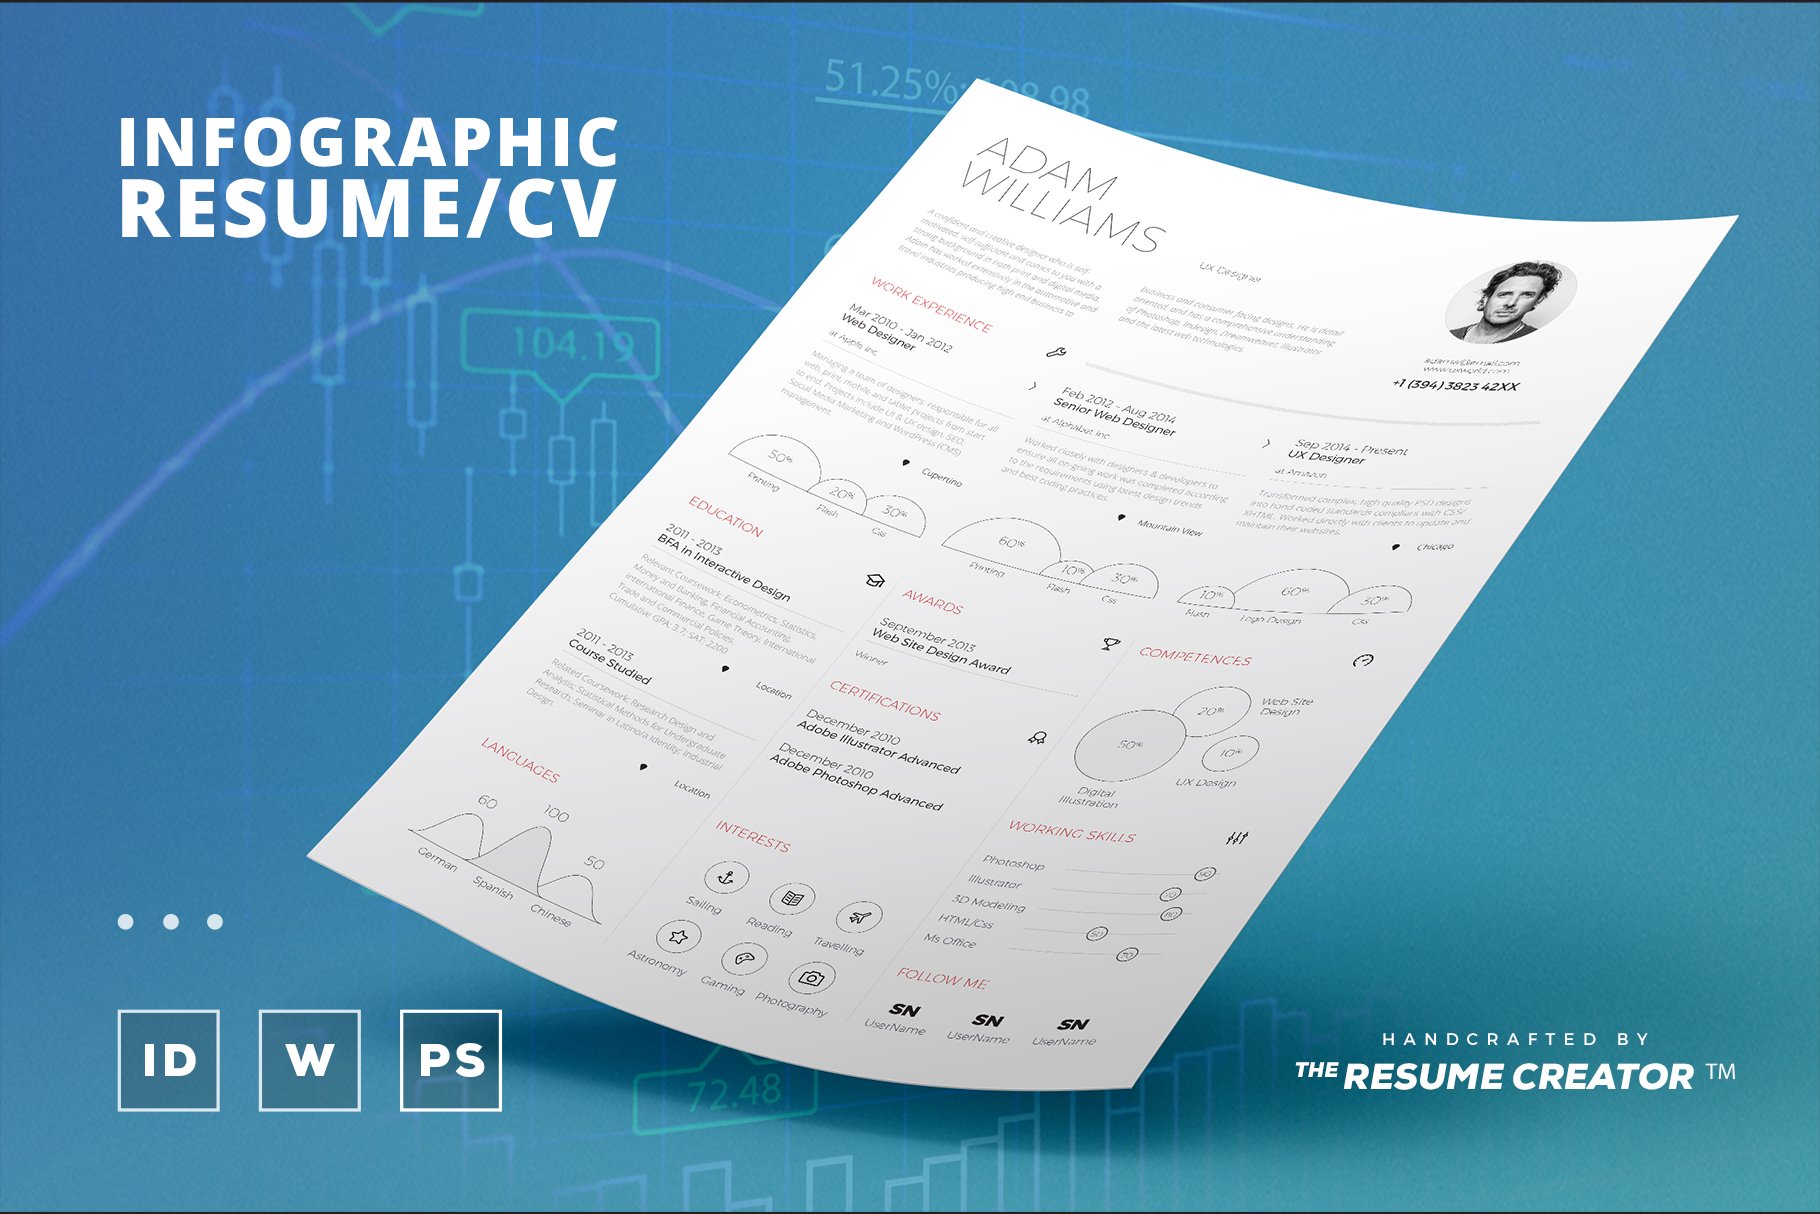 Infographic Resume/Cv Template Vol.4 cover image.